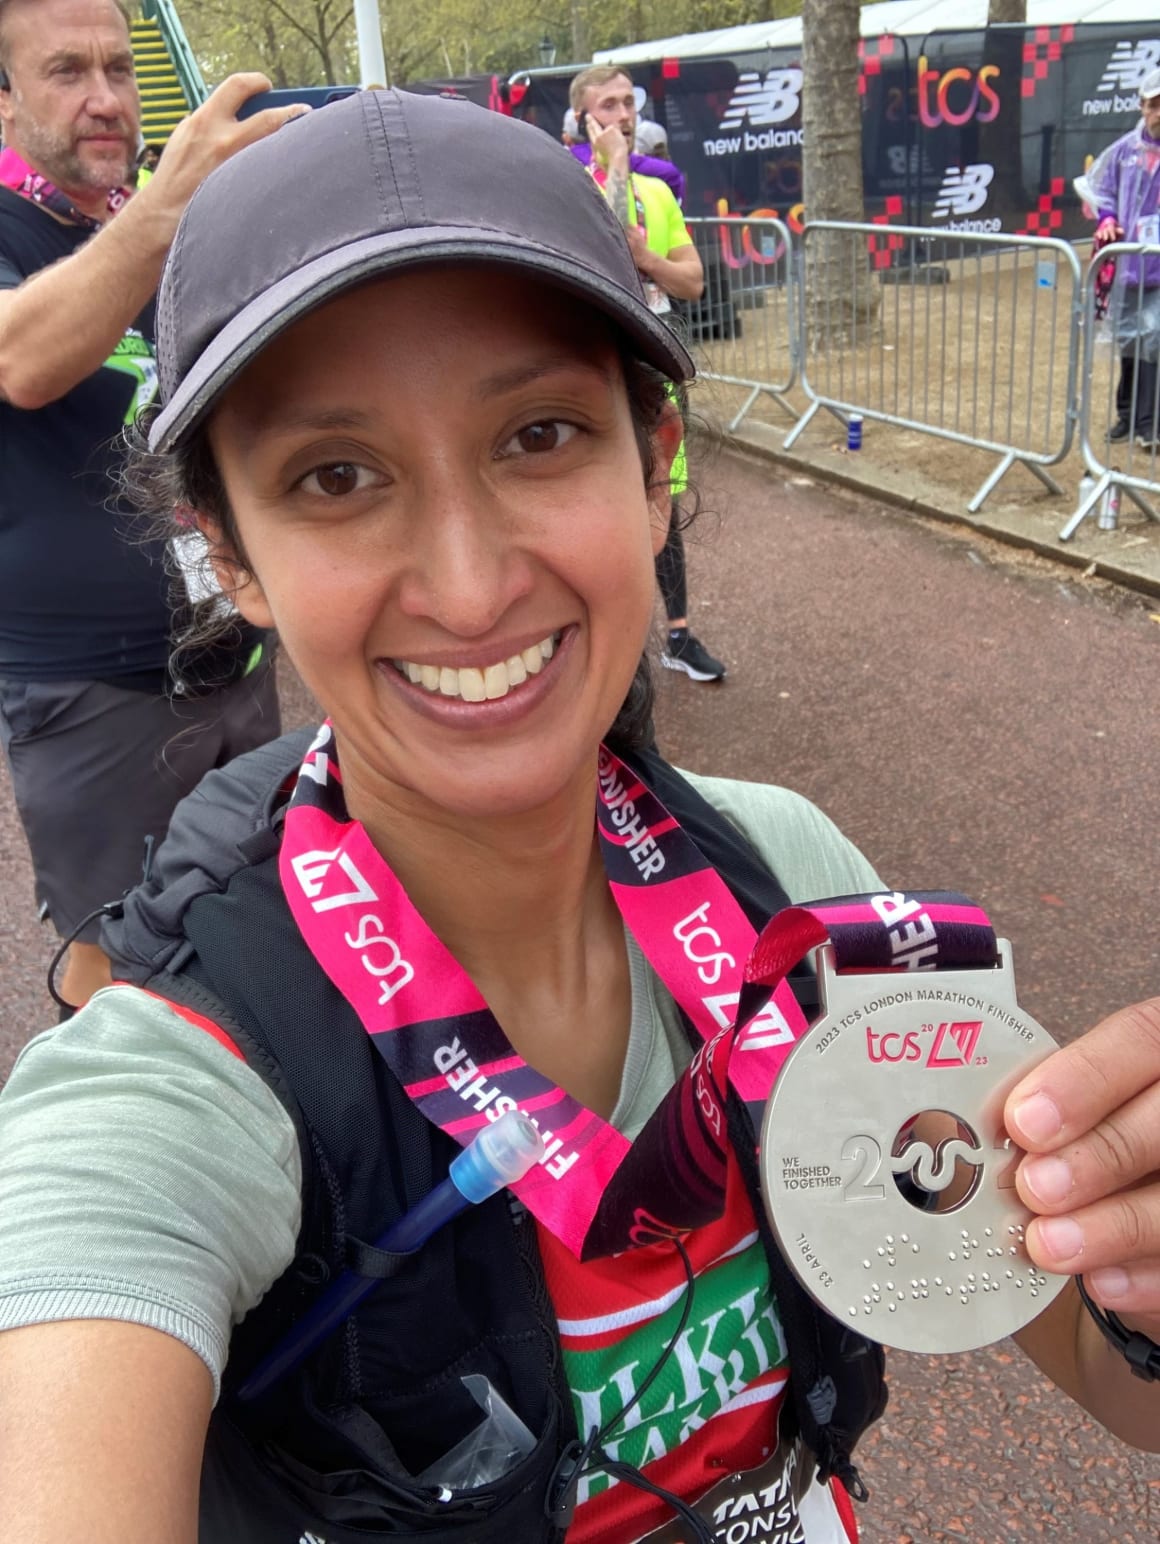 Rumana with her medal at the London Marathon